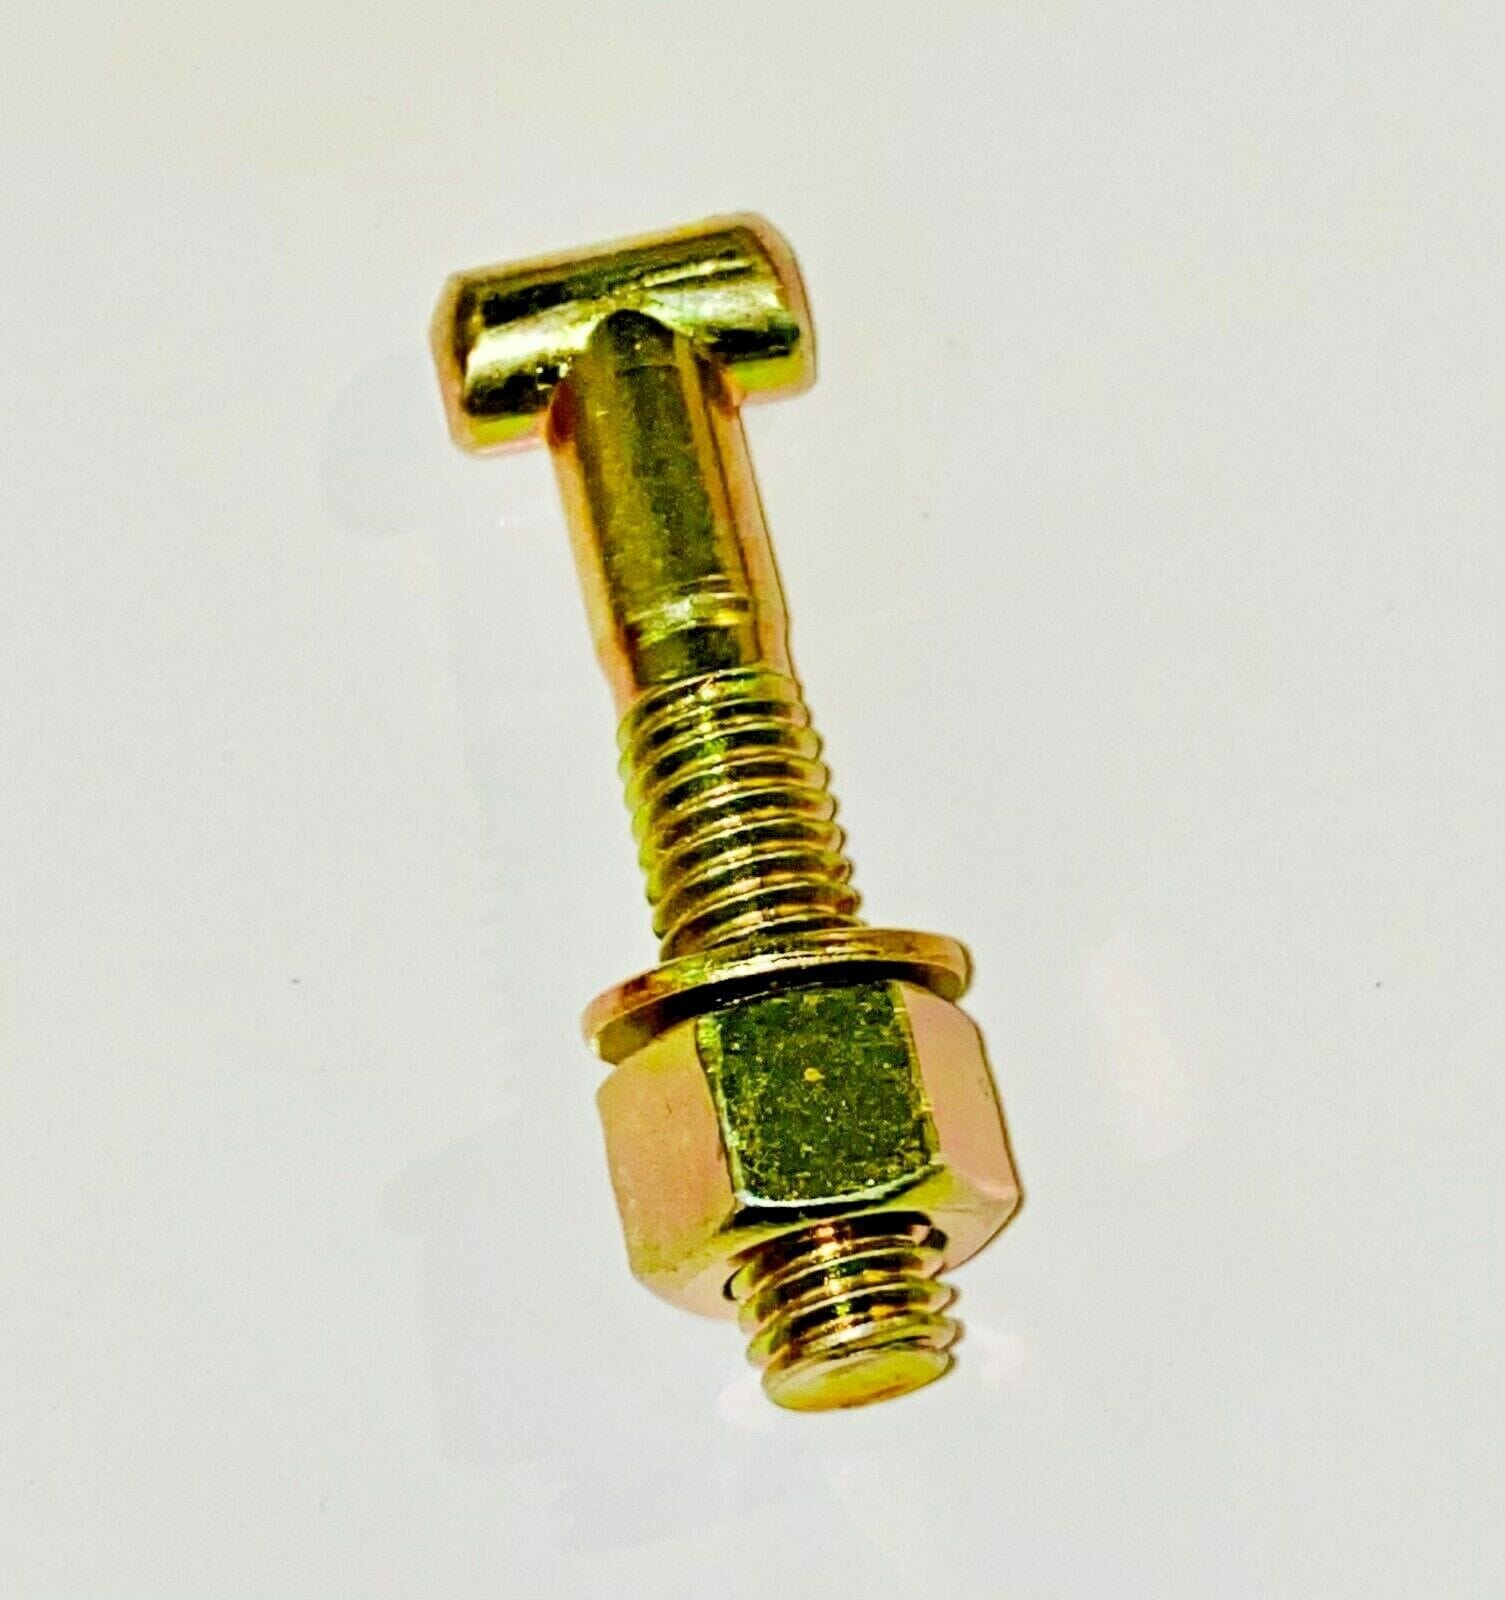 M12 X 65Mm Tee Bolt T-Slot Scaffold Coupler Bolt Screw Nut And Washer